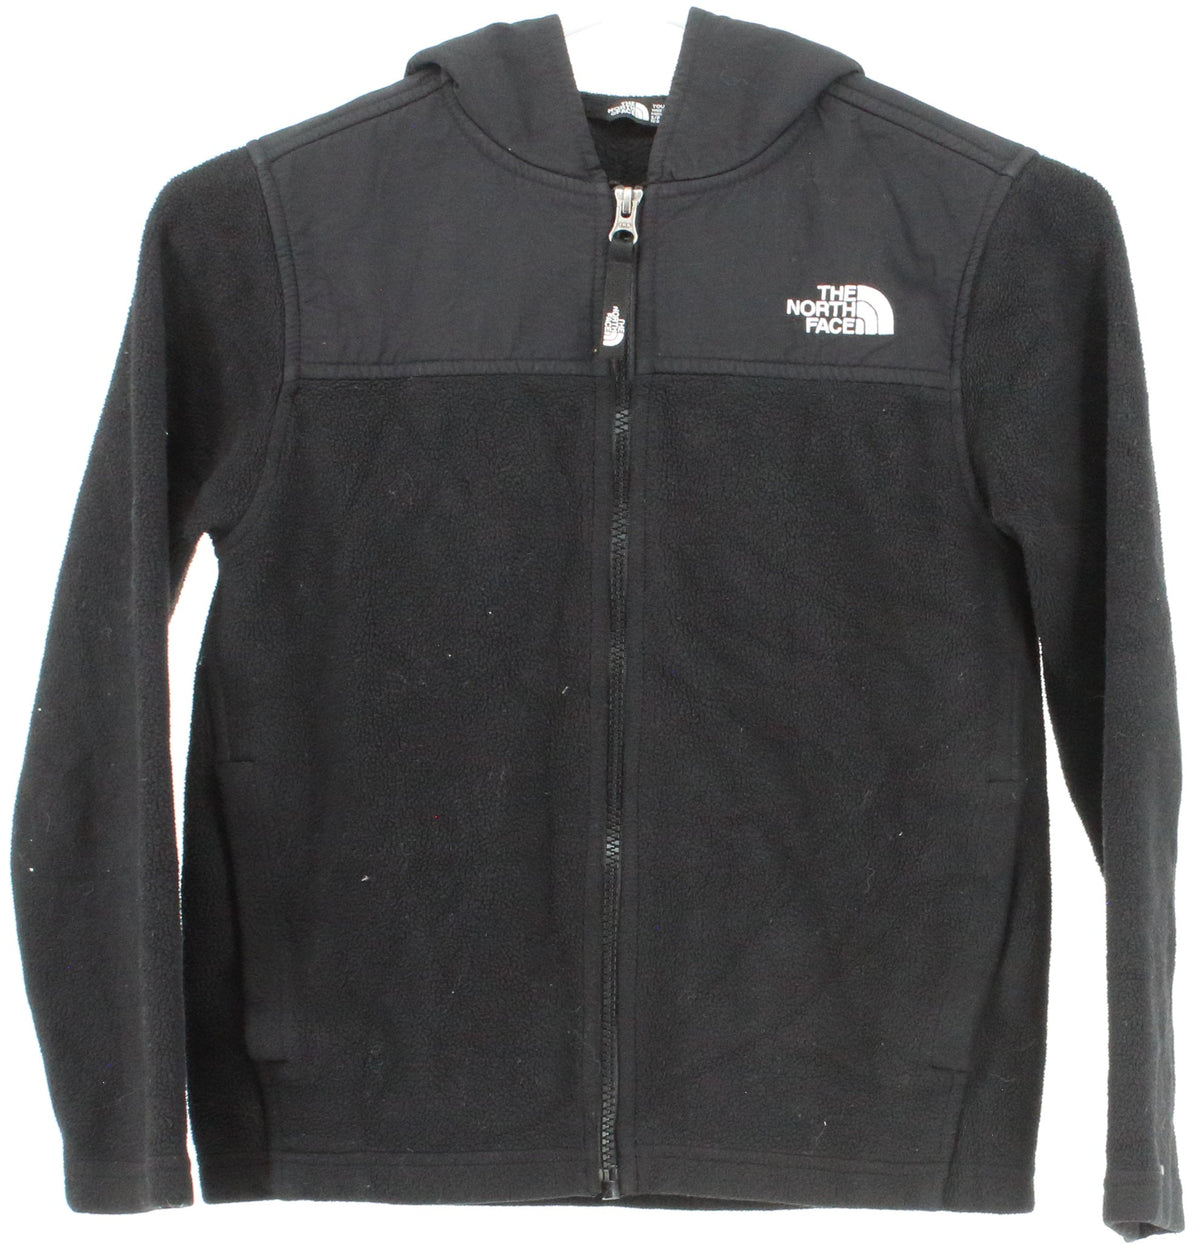 The North Face Black Youth Hooded Fleece